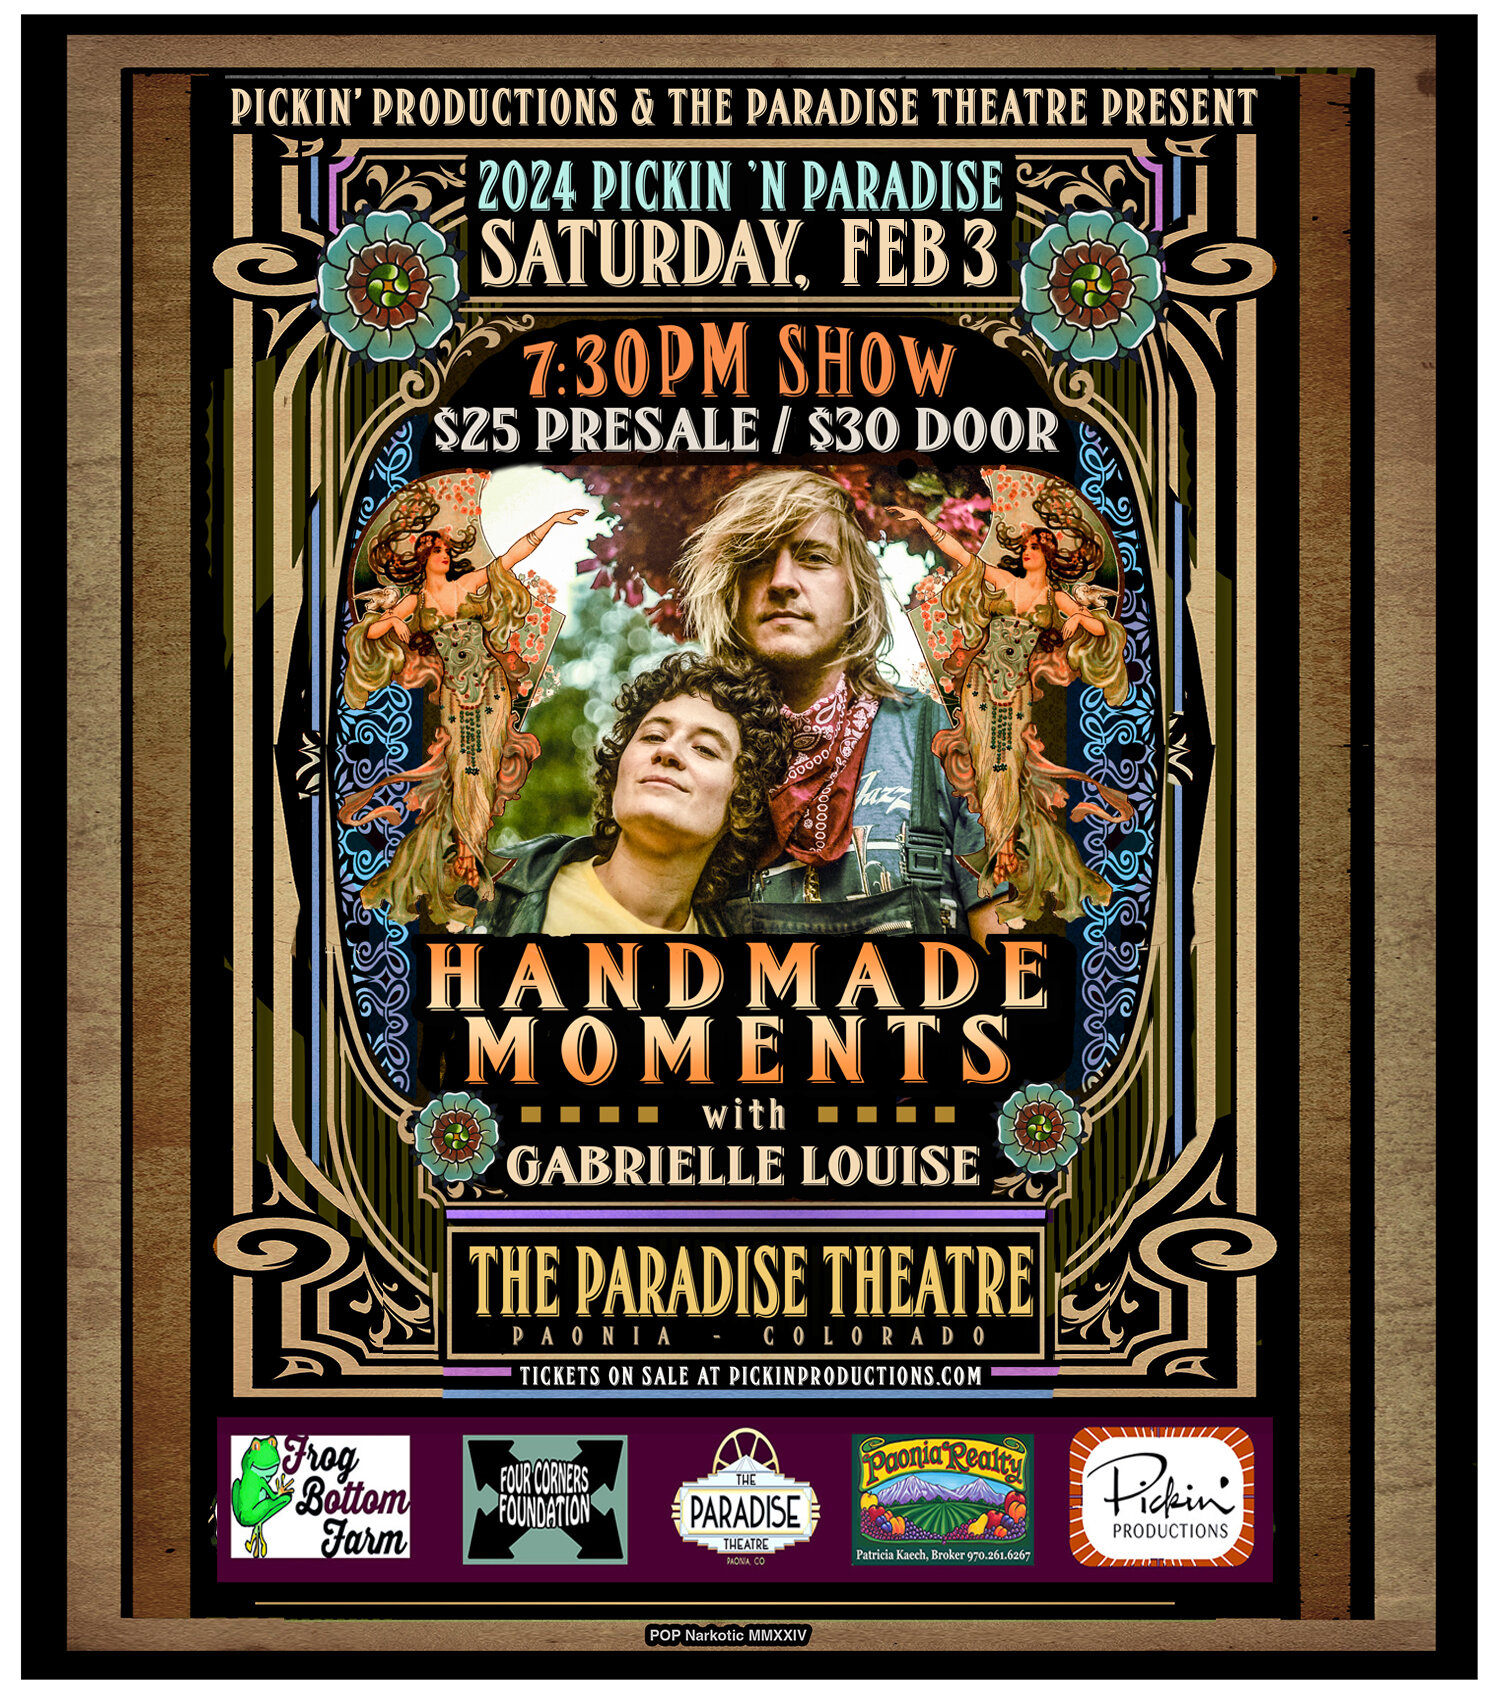 LOW TICKET ALERT ✨ Handmade Moments show featuring Gabrielle Louise Music on Saturday night 2/3 at Paradise Theatre of Paonia is almost sold out! 

Get your tickets ASAP: https://www.simpletix.com/e/handmade-moments-tickets-152488